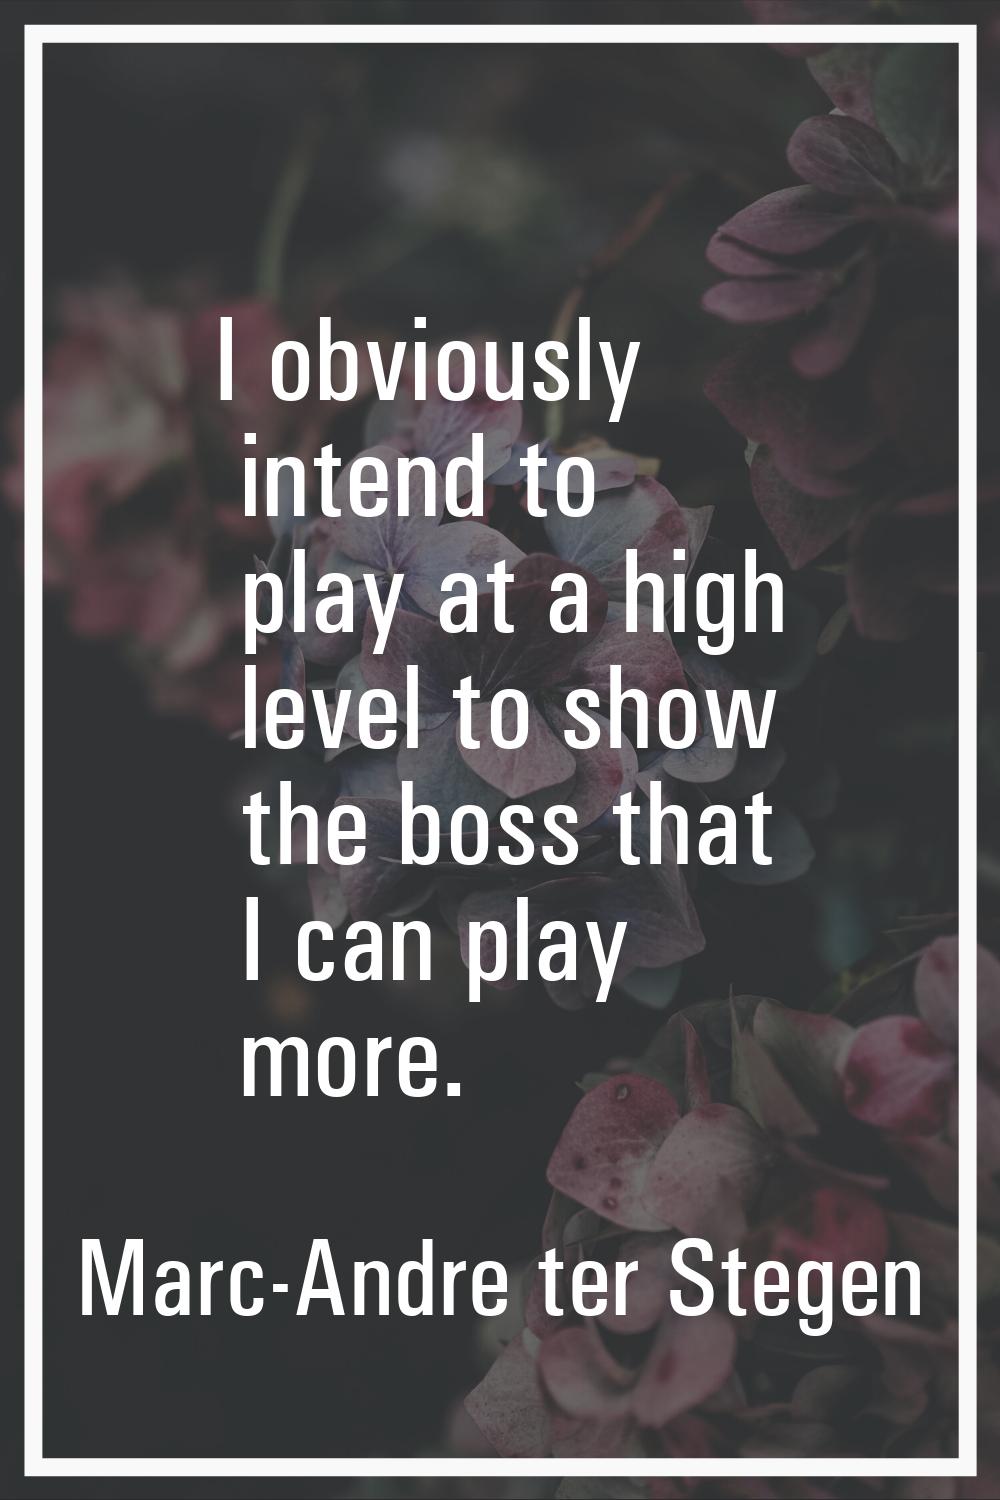 I obviously intend to play at a high level to show the boss that I can play more.